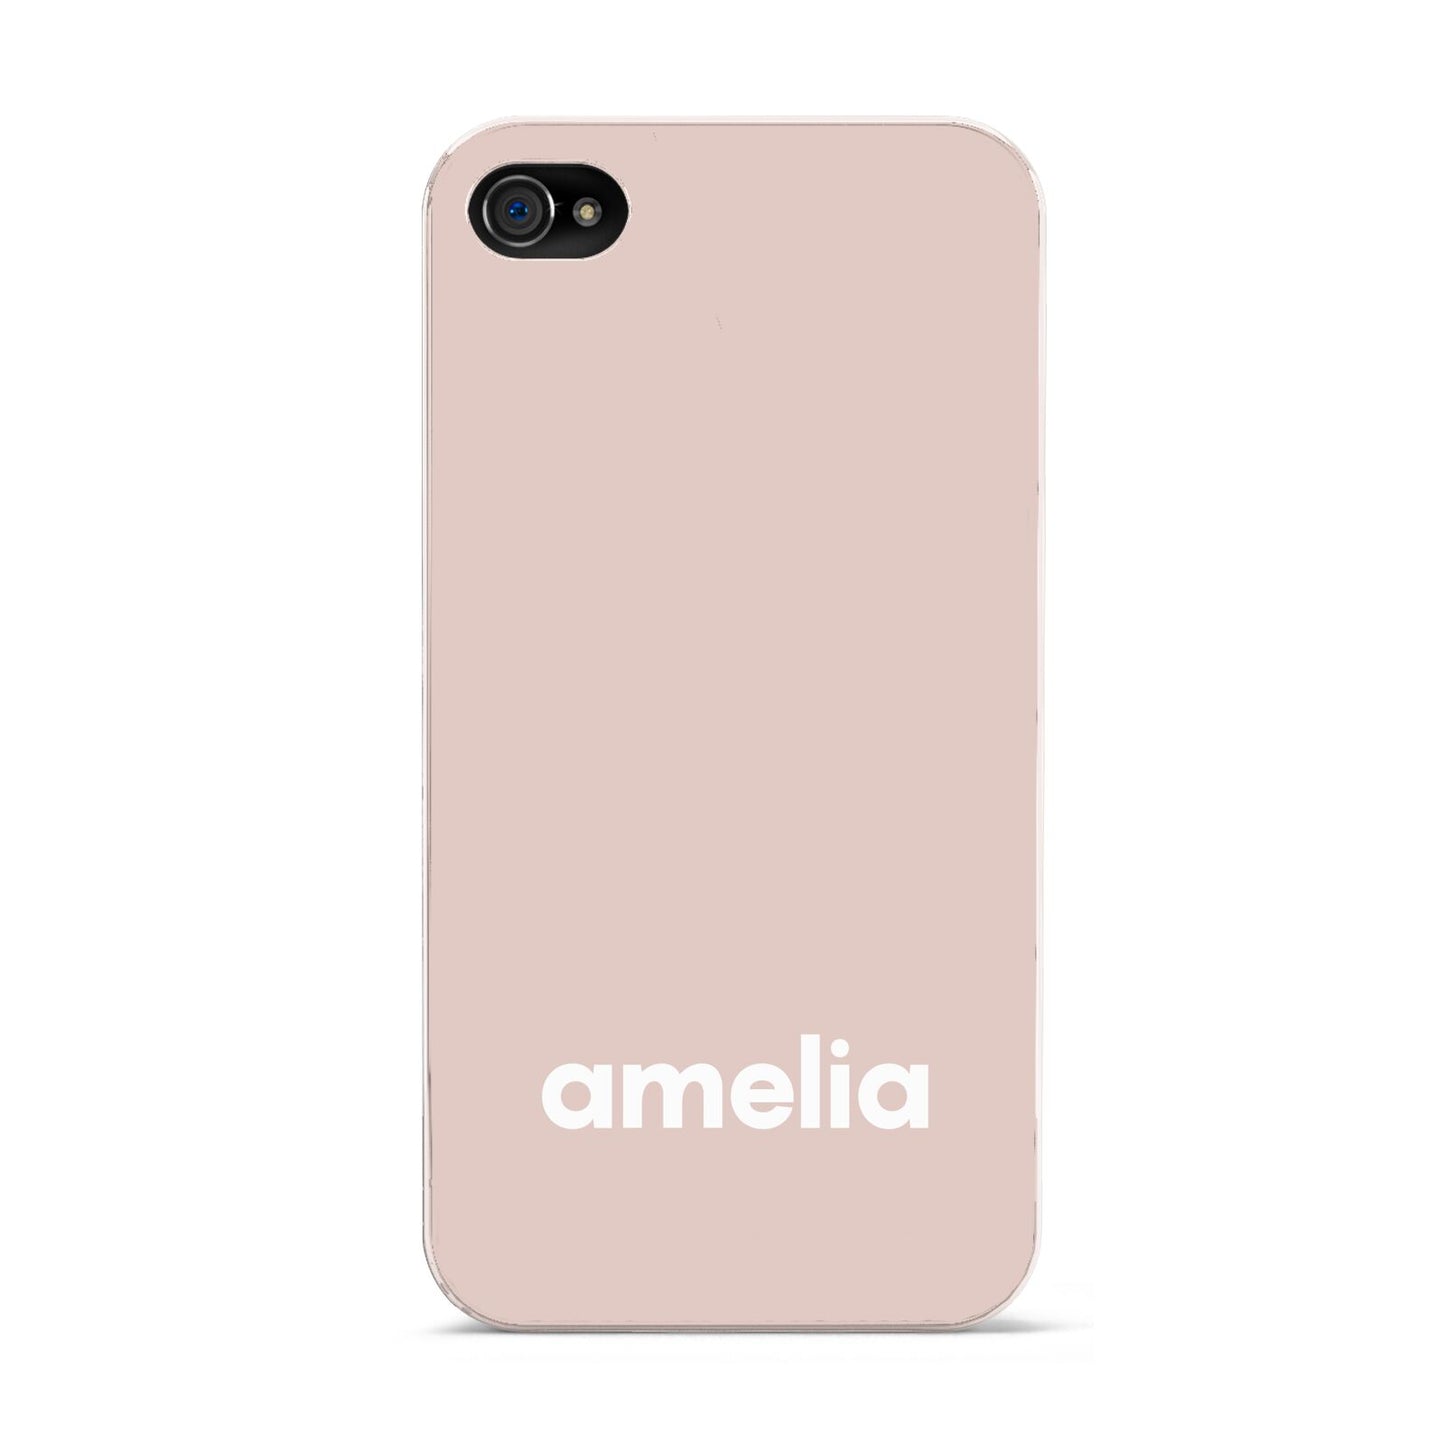 Simple Blush Pink with Name Apple iPhone 4s Case